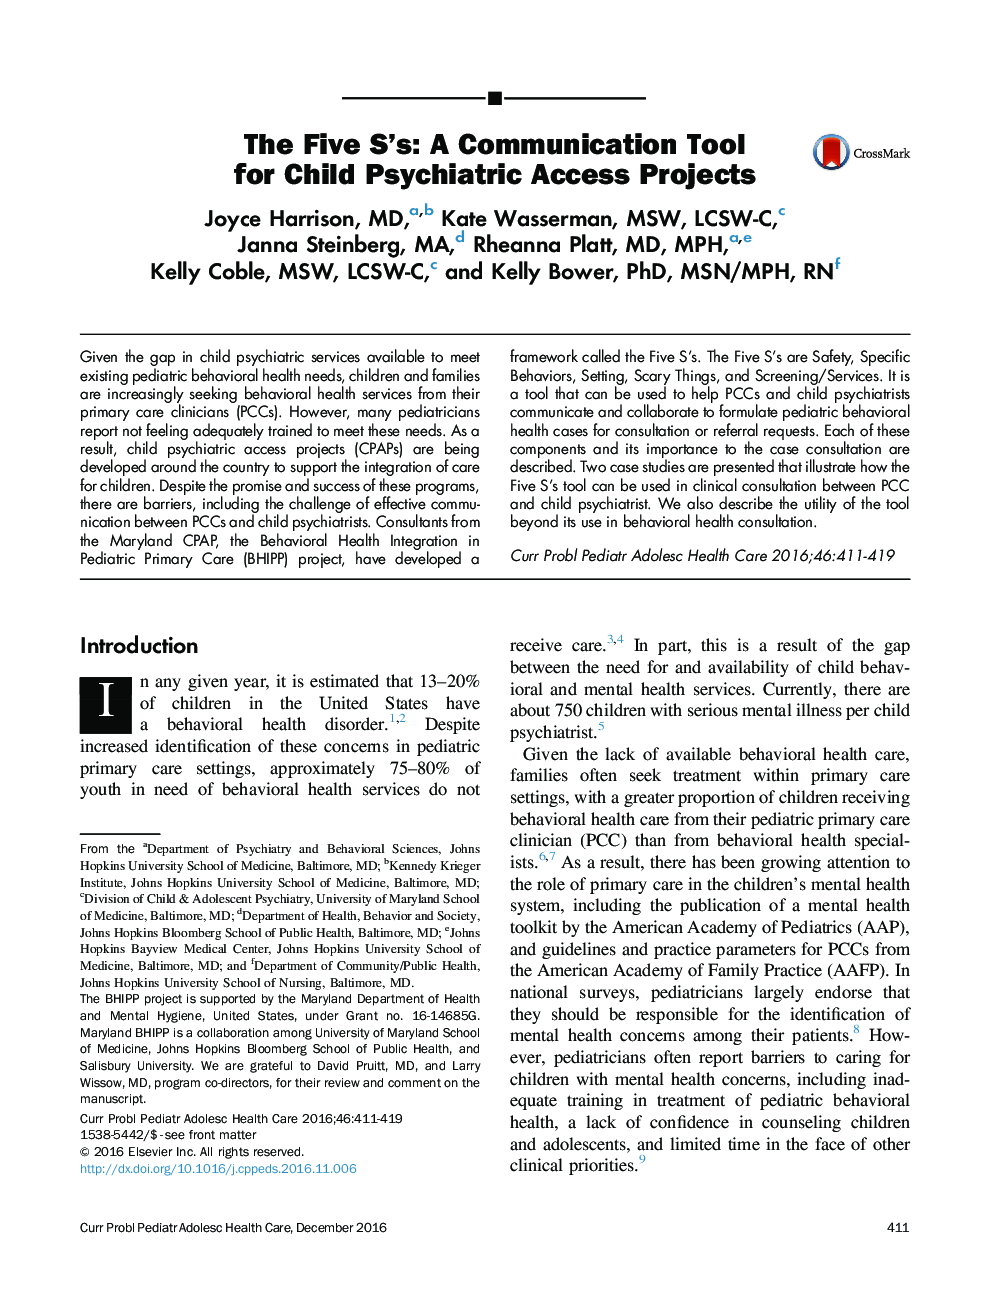 The Five S's: A Communication Tool for Child Psychiatric Access Projects